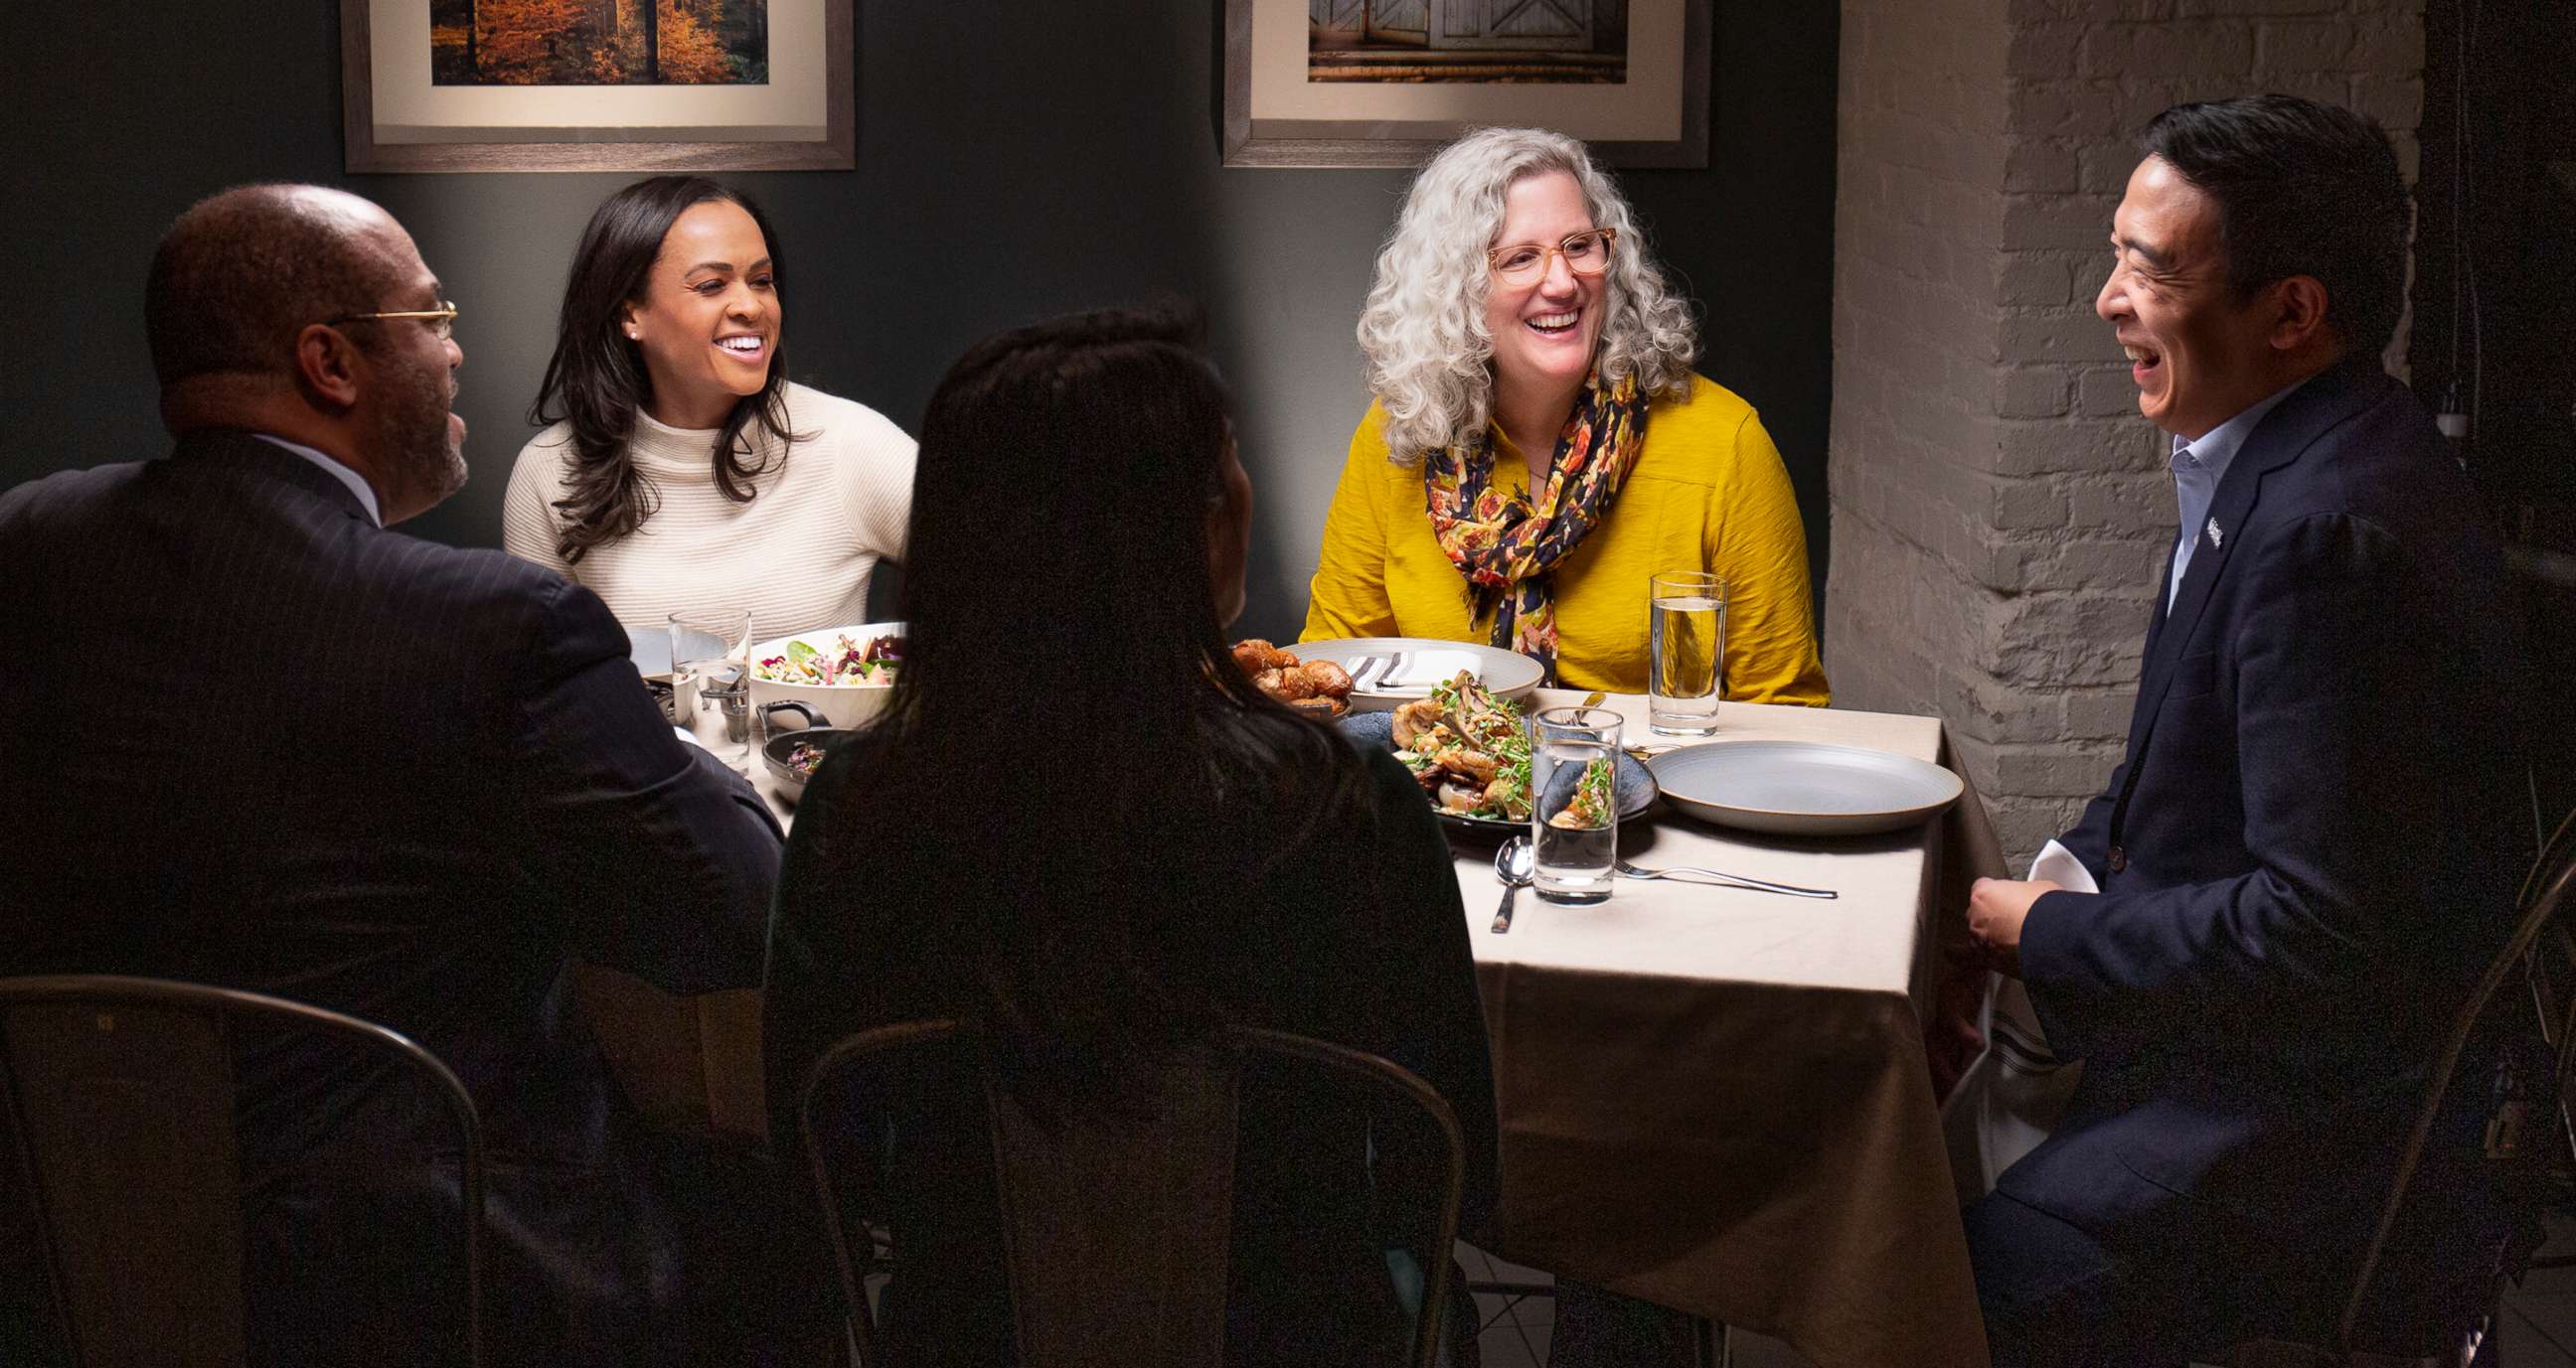 PHOTO: Democratic presidential candidate Andrew Yang, right, joins ABC's Linsey Davis, second from left and voters Ramsey Smith, Jaslin Kaur and Mara Novak for dinner.